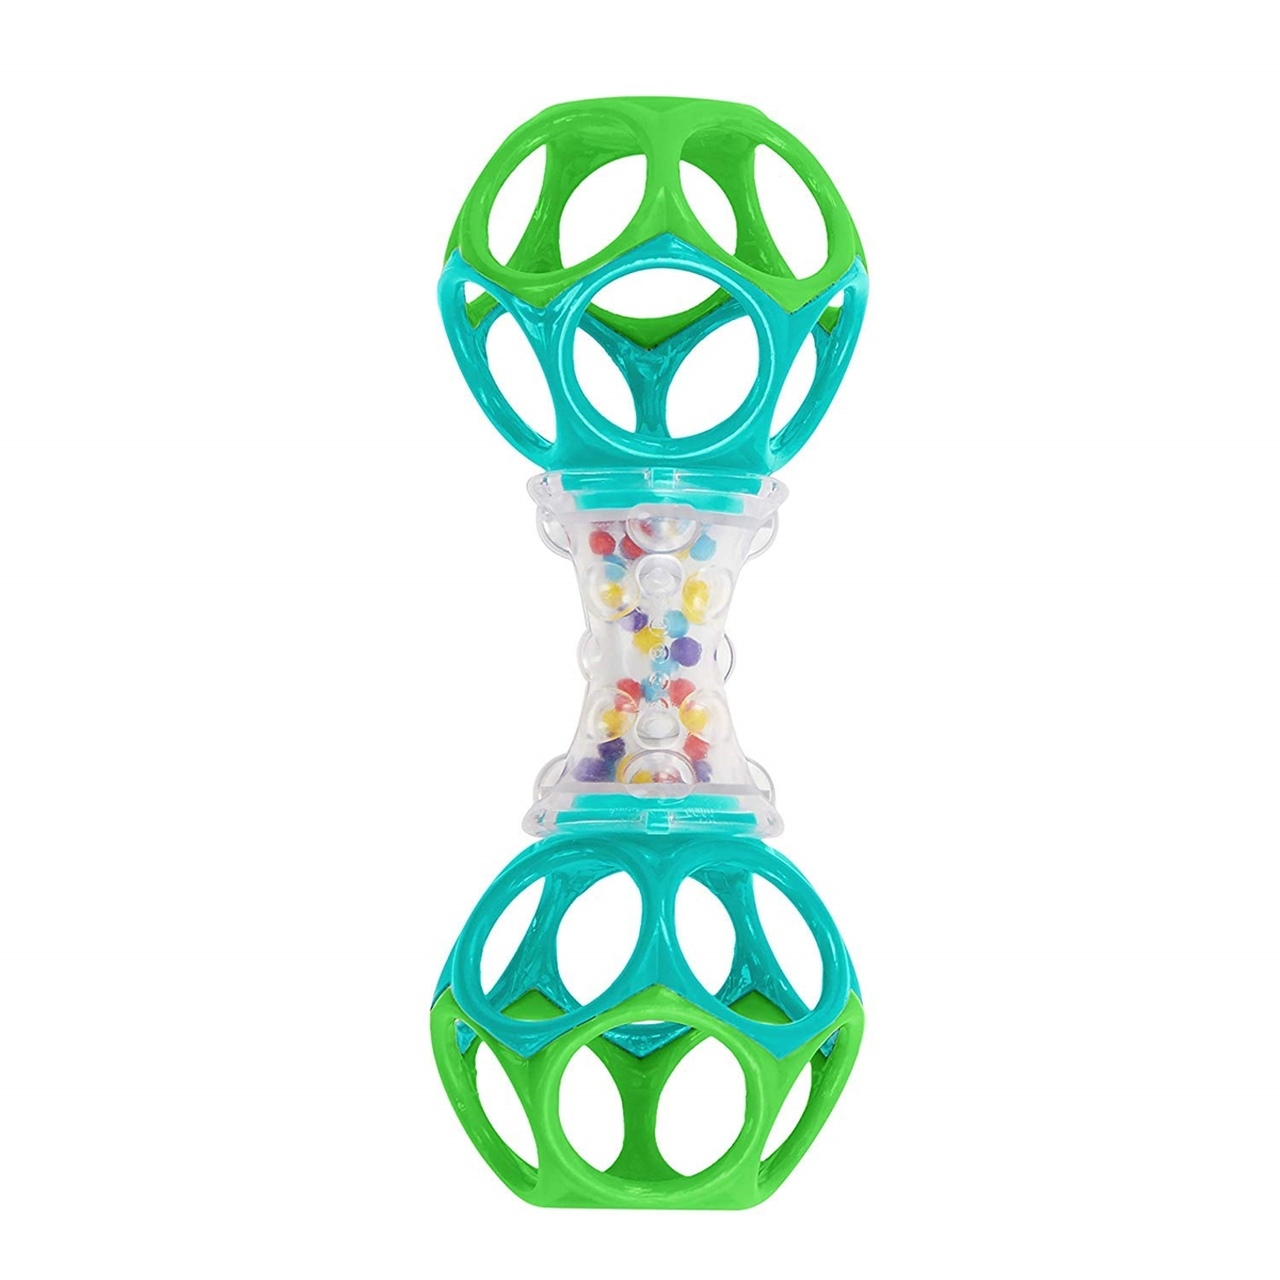 Oball Shaker Toy